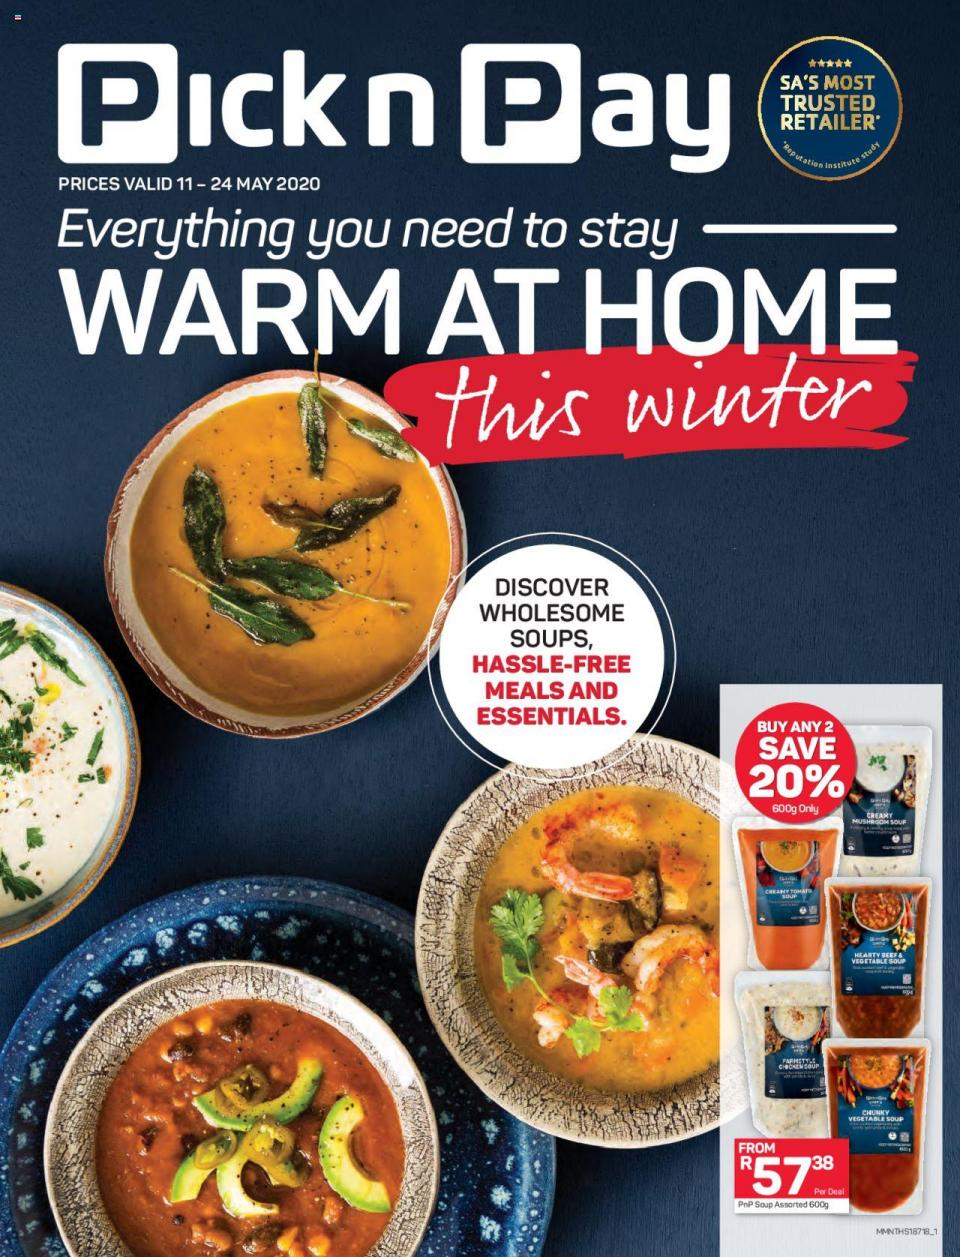 Pick n Pay Specials Stay Warm at Home 11 May 2020